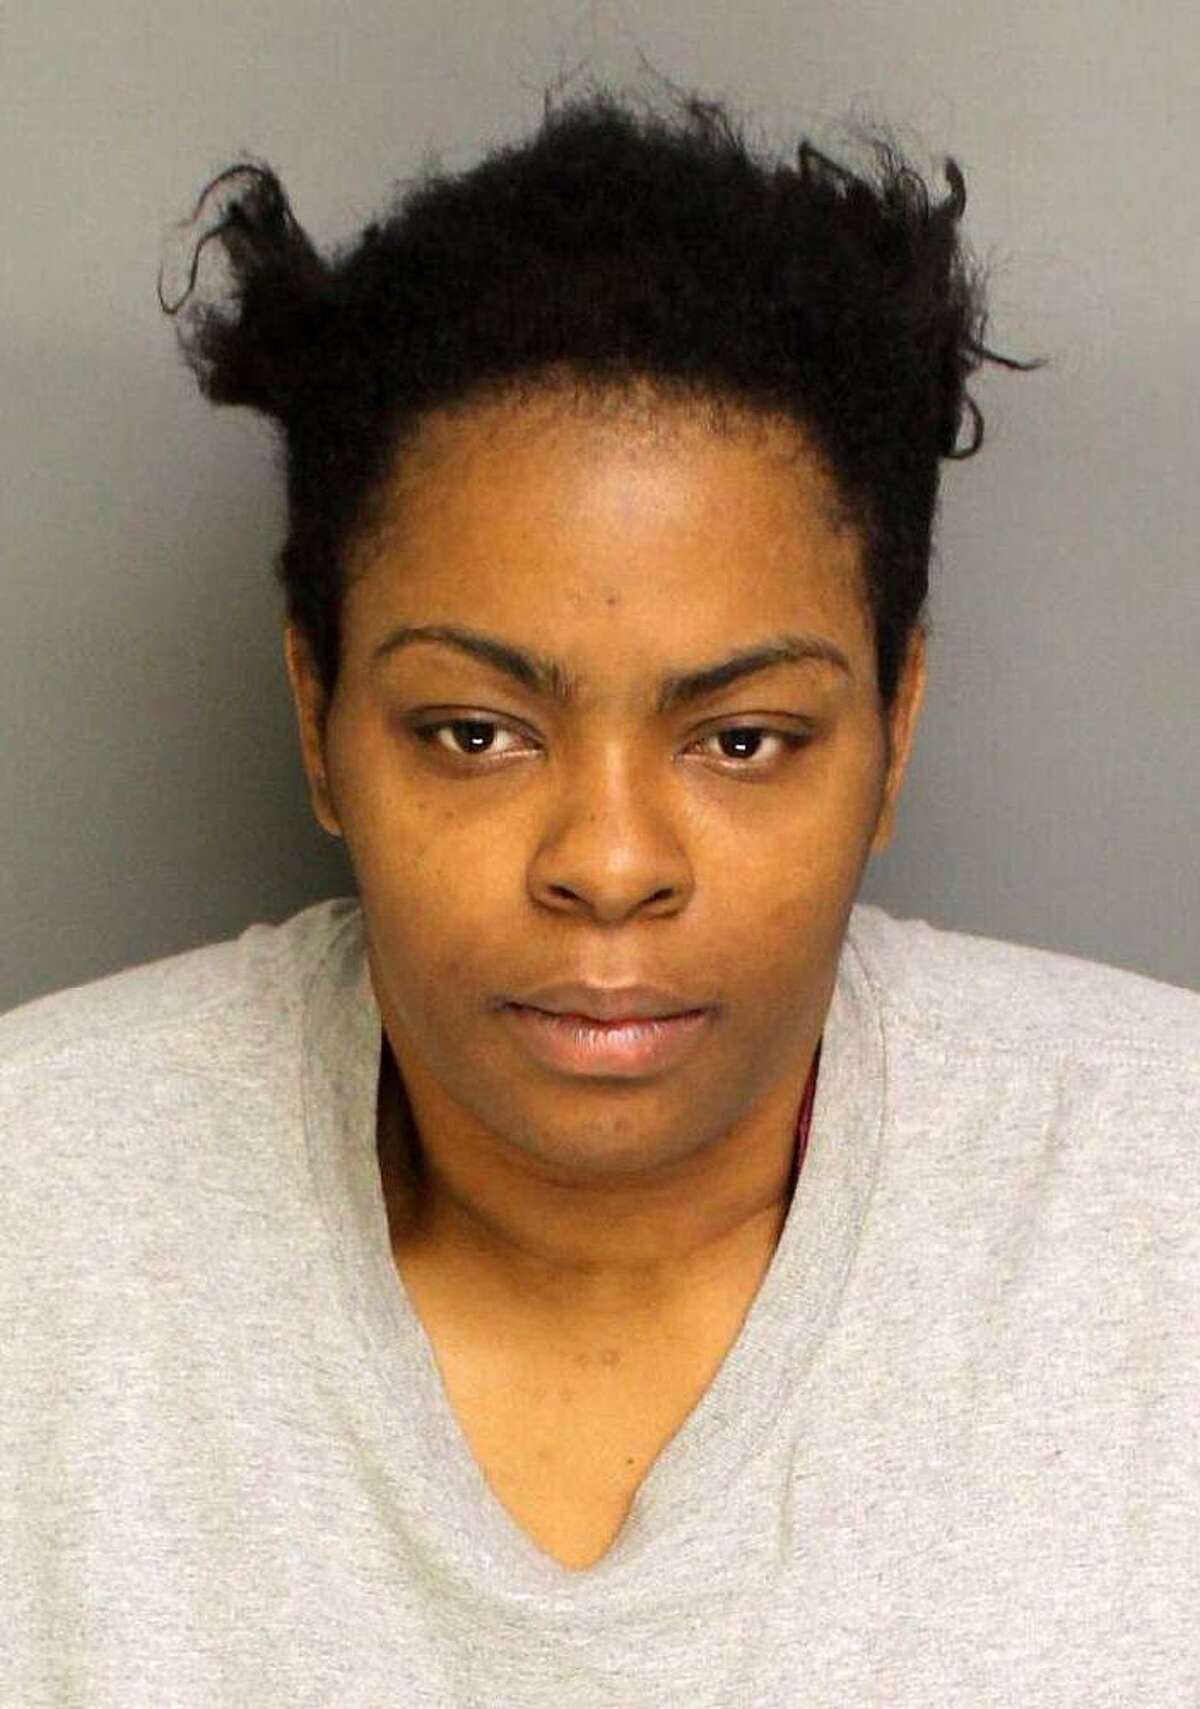 Police say they have arrested the caretaker and niece of a disabled man after he died in February. Tynisha Hall, 35, was arrested Thursday, March 23, 2017 on charges of murder, tampering with evidence and resisting arrest, according to Capt. Brian Fitzgerald of the Bridgeport Police Department.